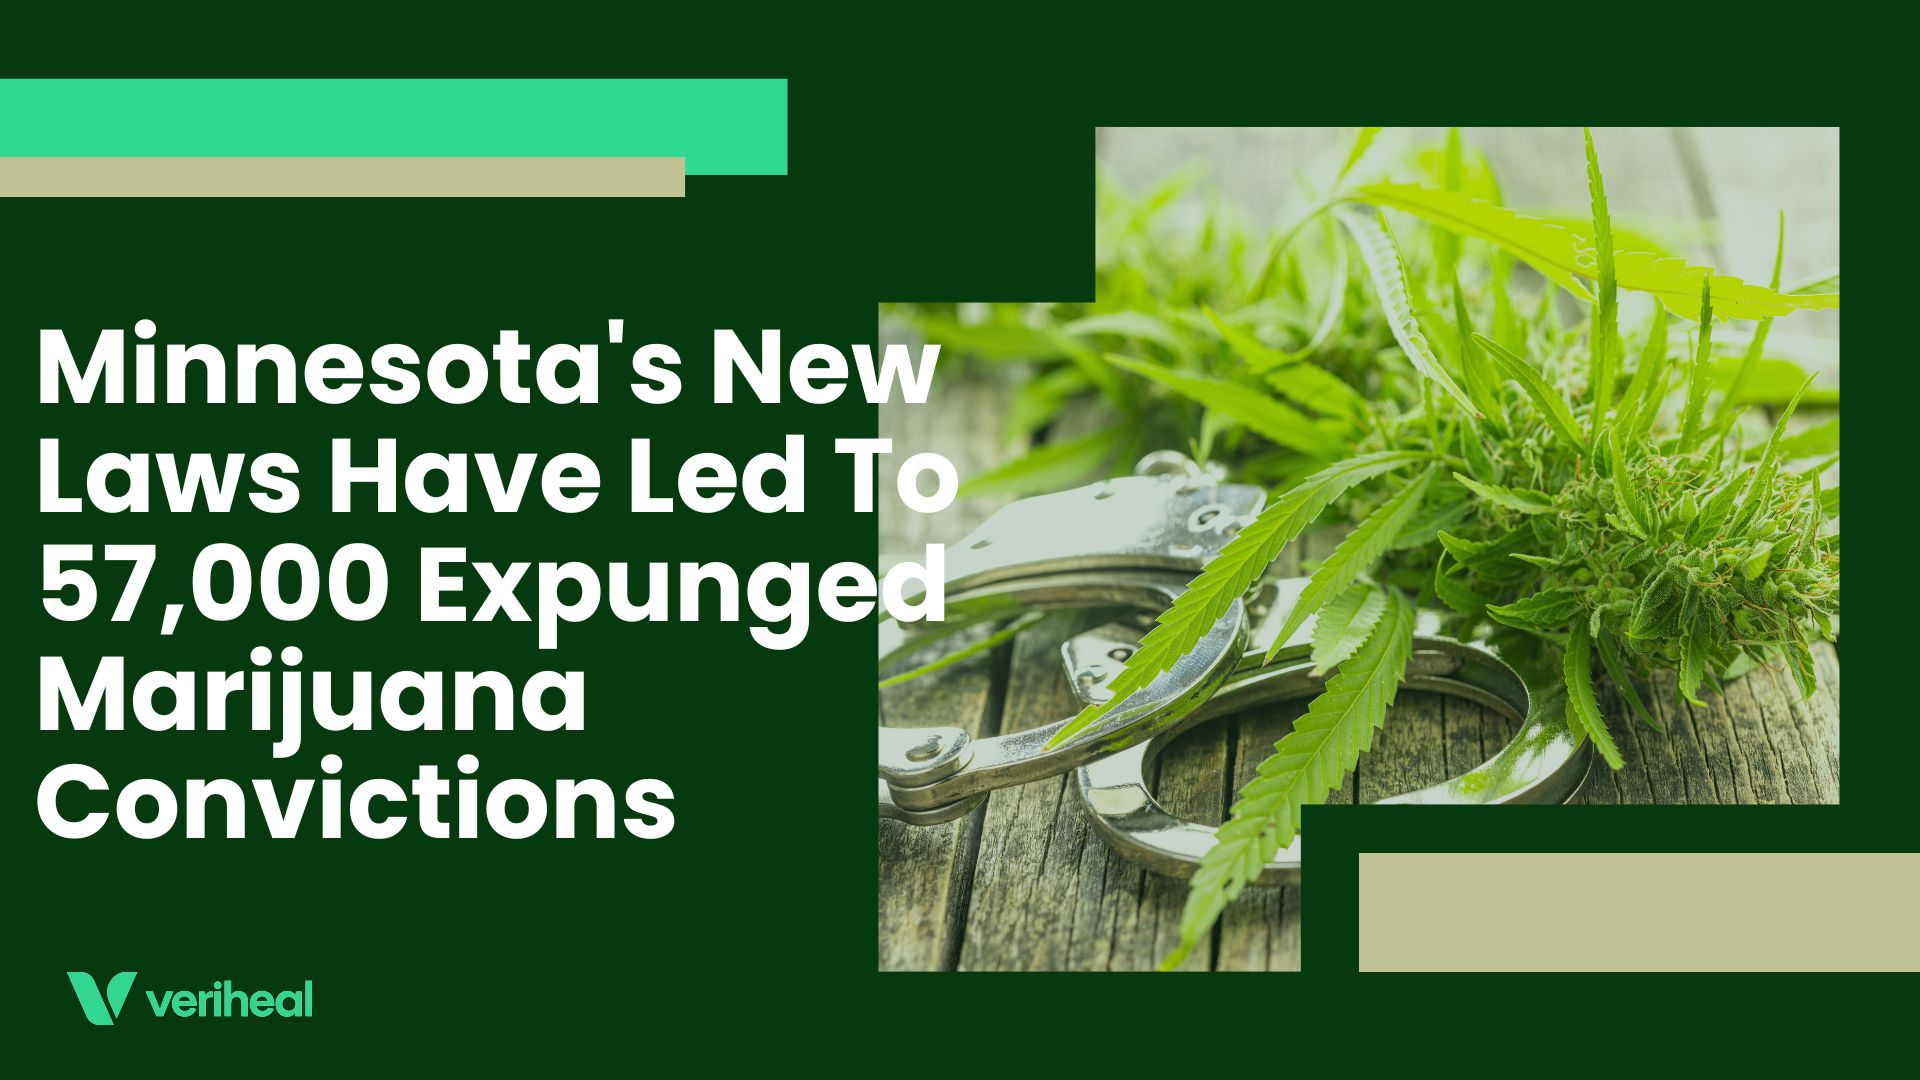 Minnesota’s New Laws Have Led To 57,000 Expunged Marijuana Convictions